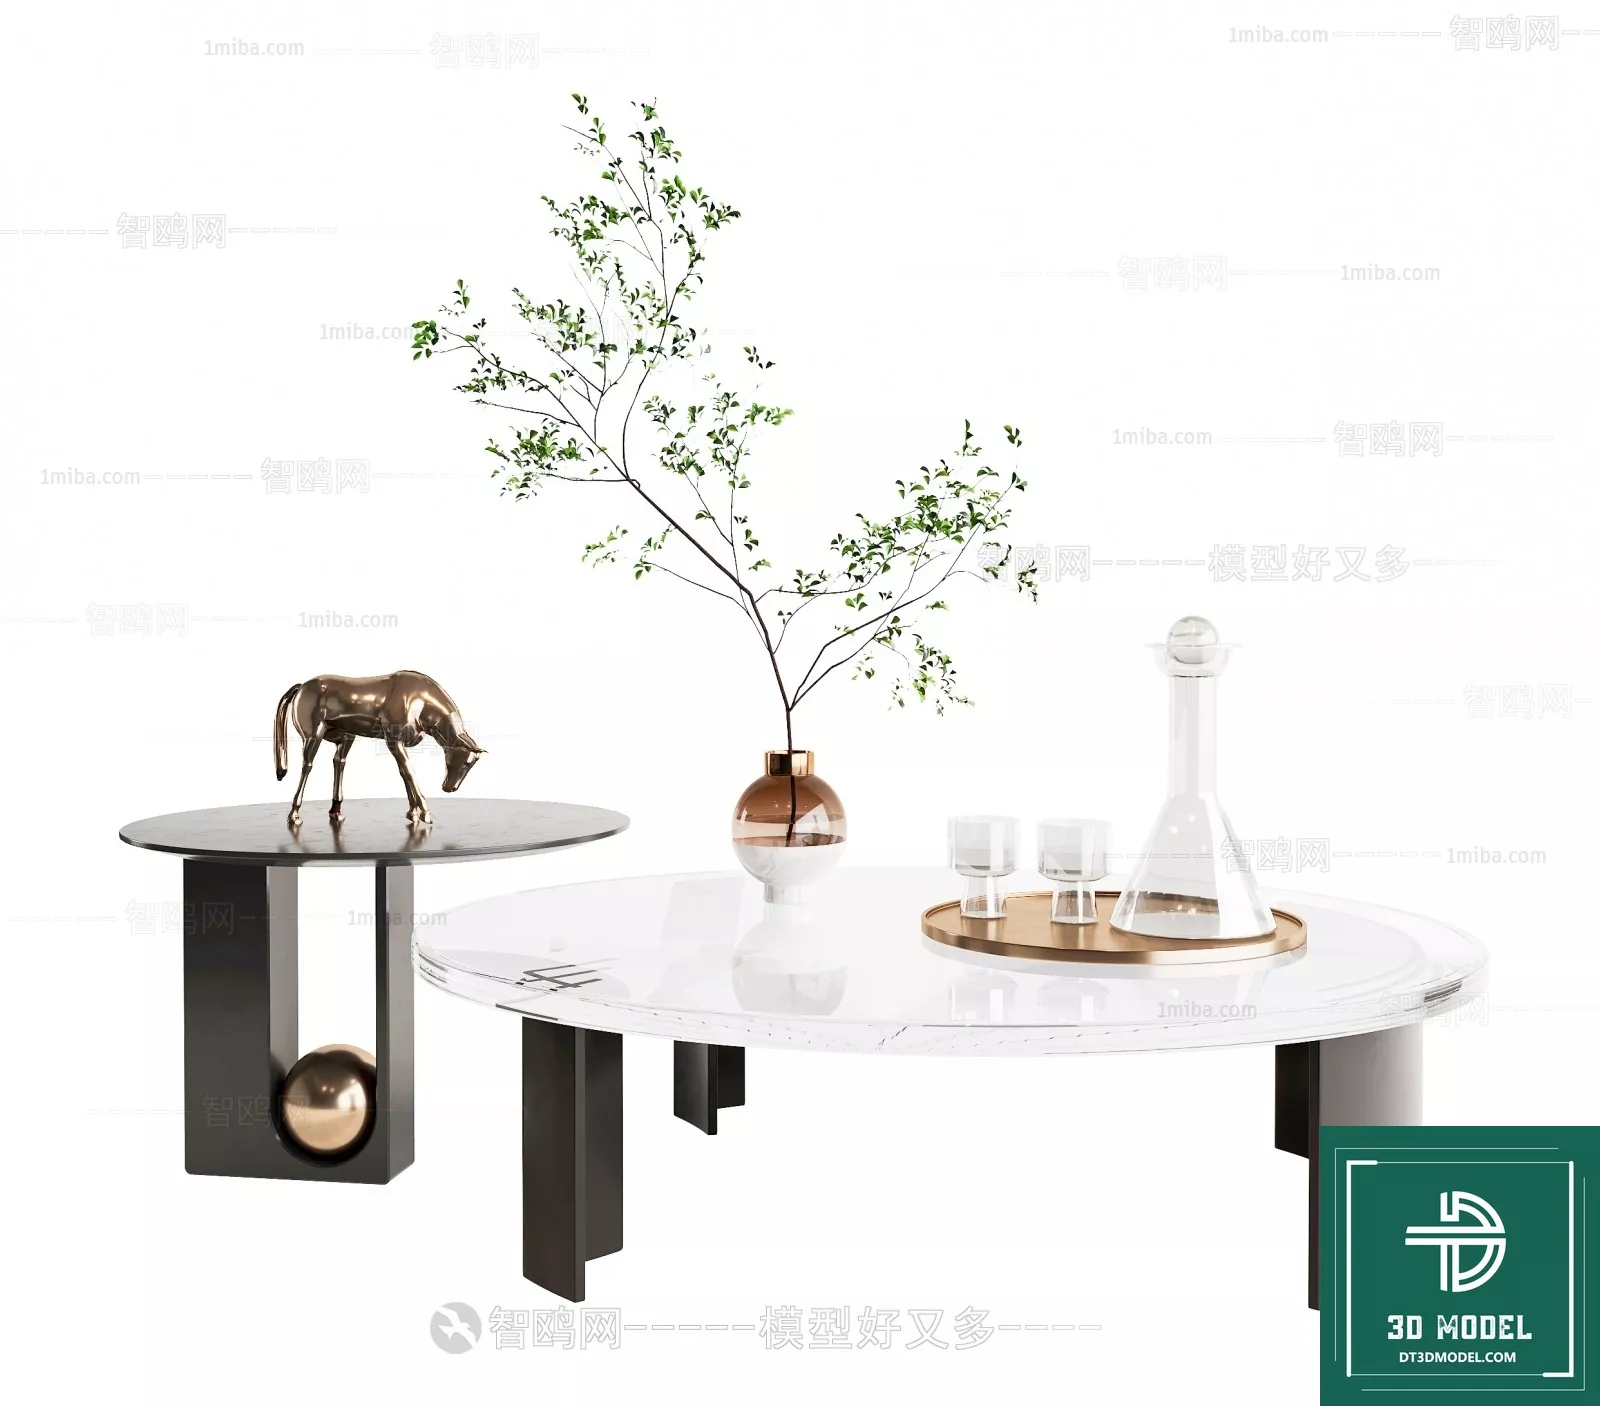 MODERN TEA TABLE - SKETCHUP 3D MODEL - VRAY OR ENSCAPE - ID14952